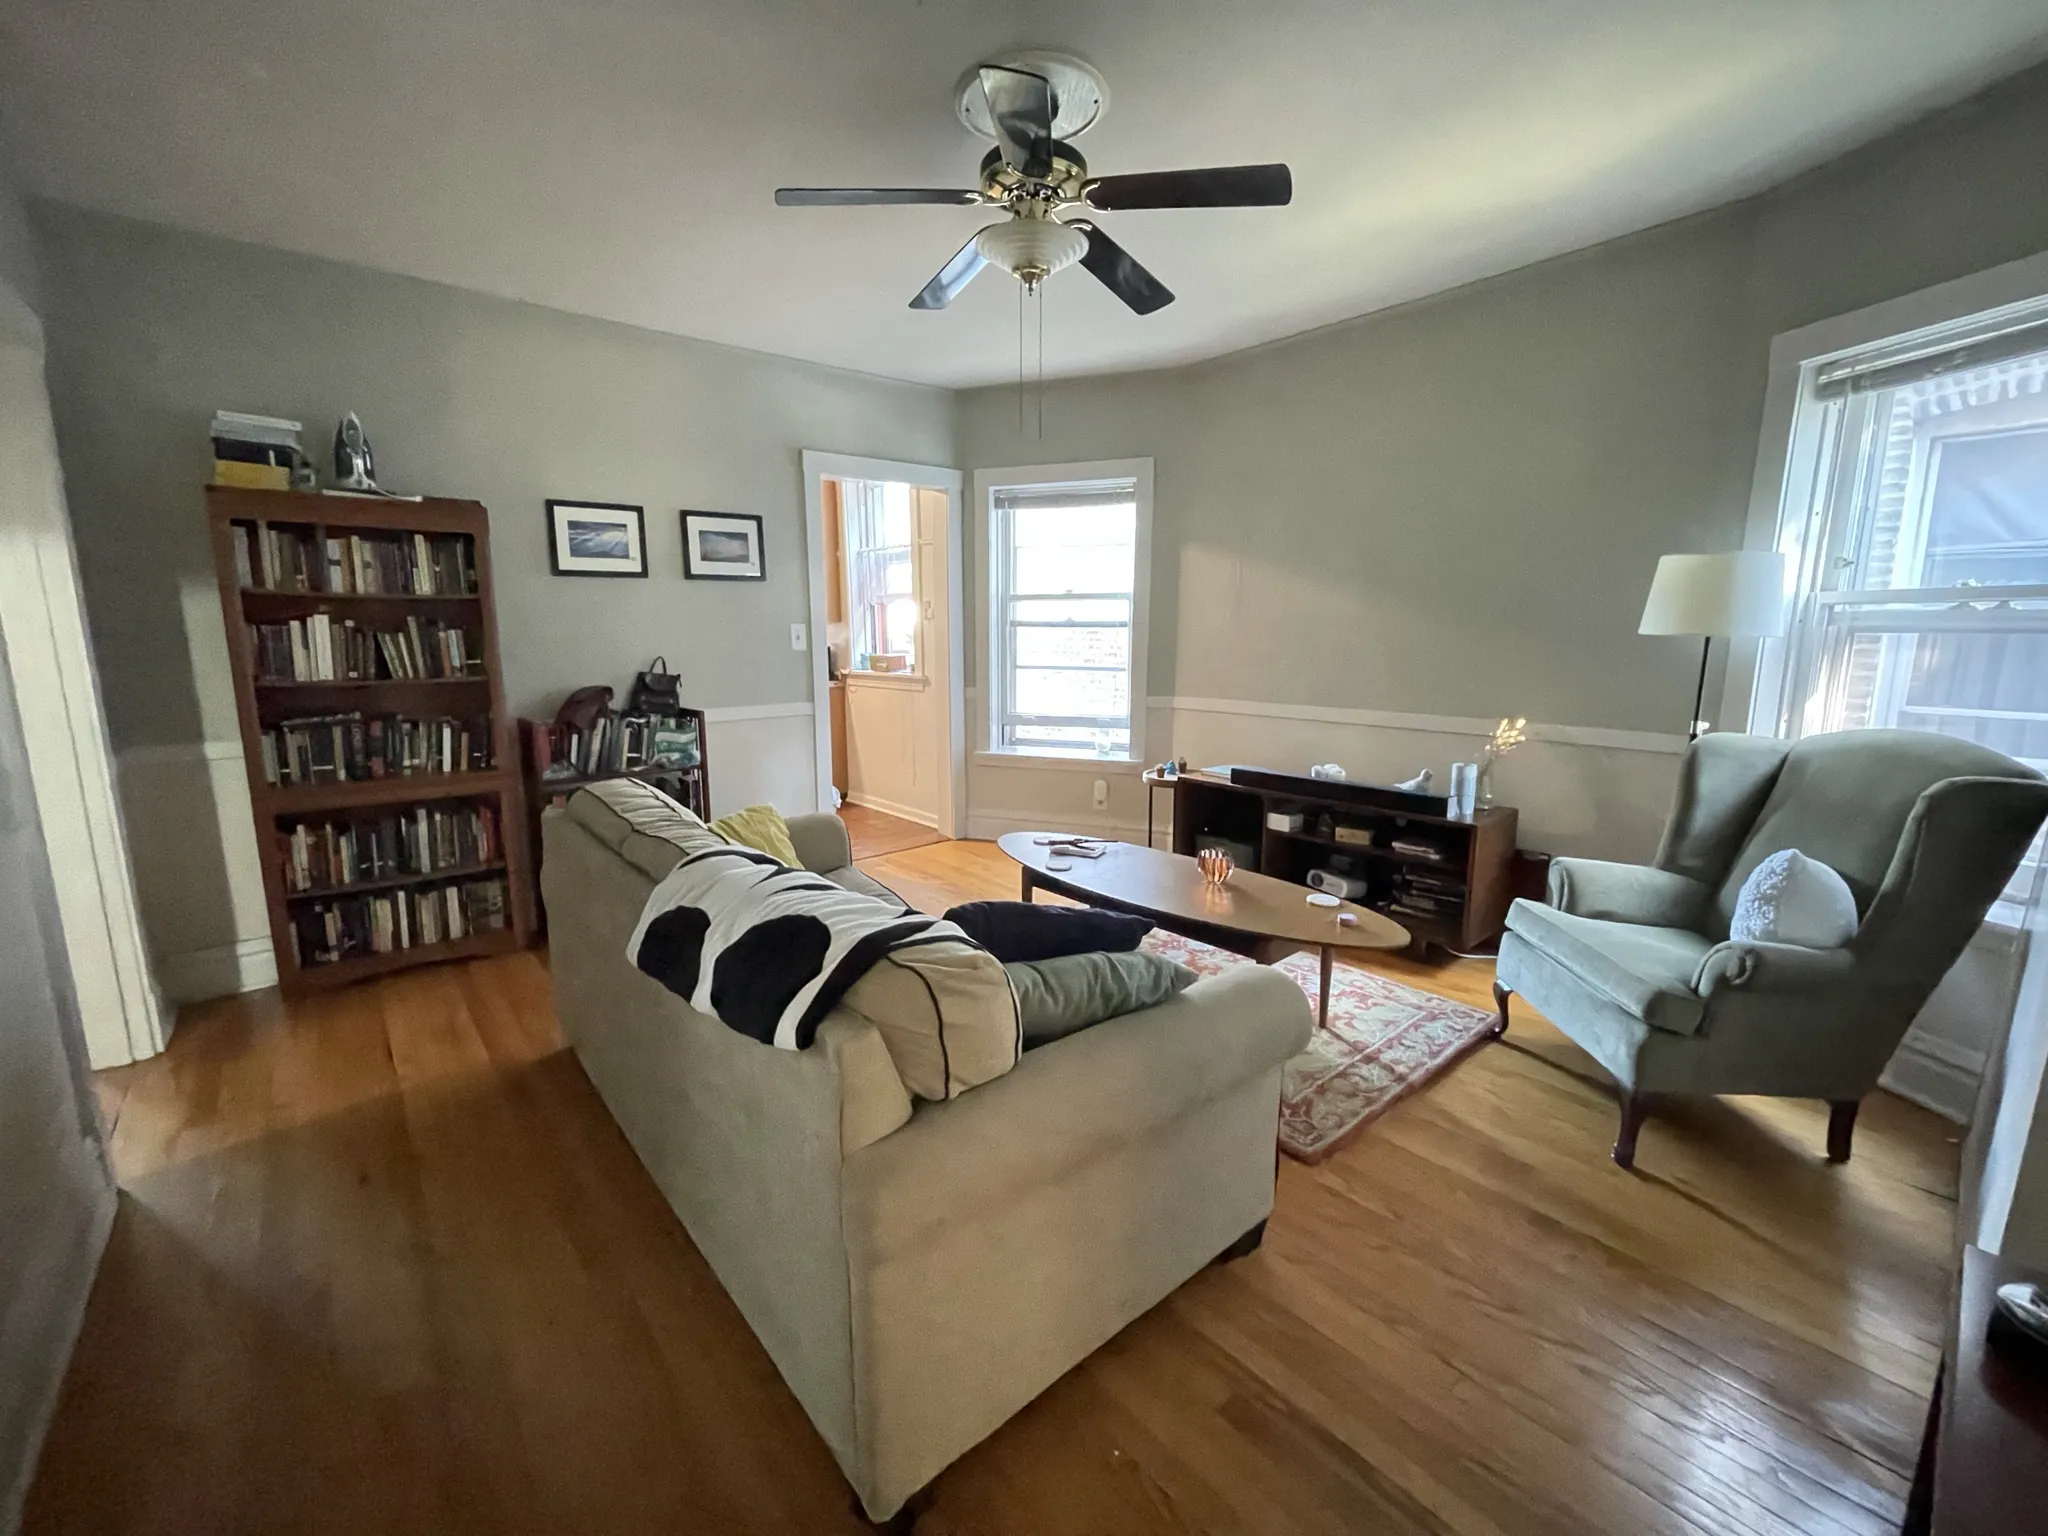 6515 N GREENVIEW AVE 60626-unit#1-Chicago-IL